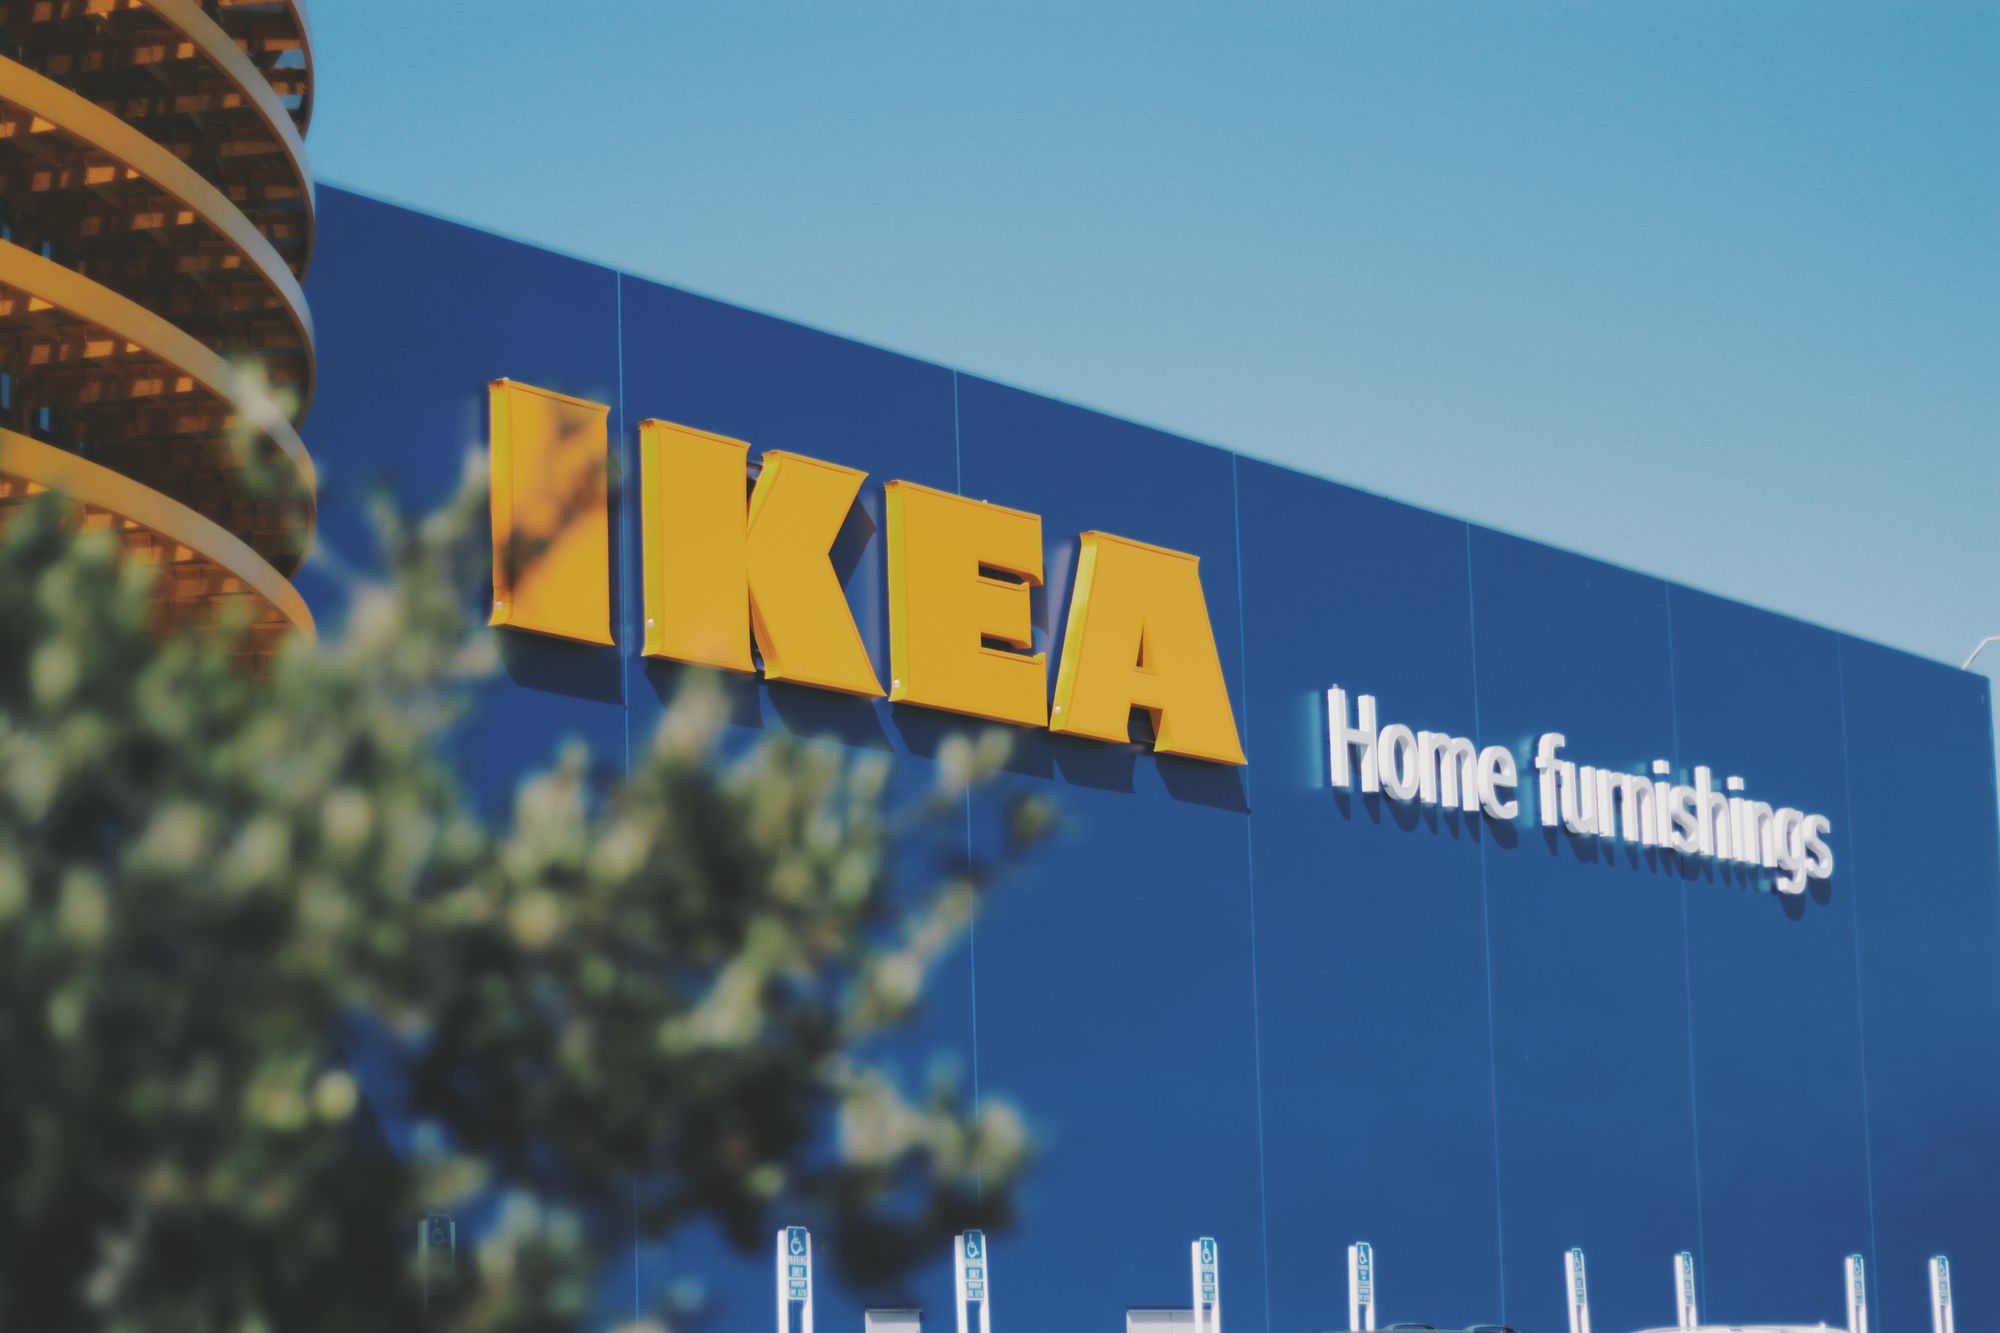 Mobility Data – A tale of two IKEA's in Bucharest